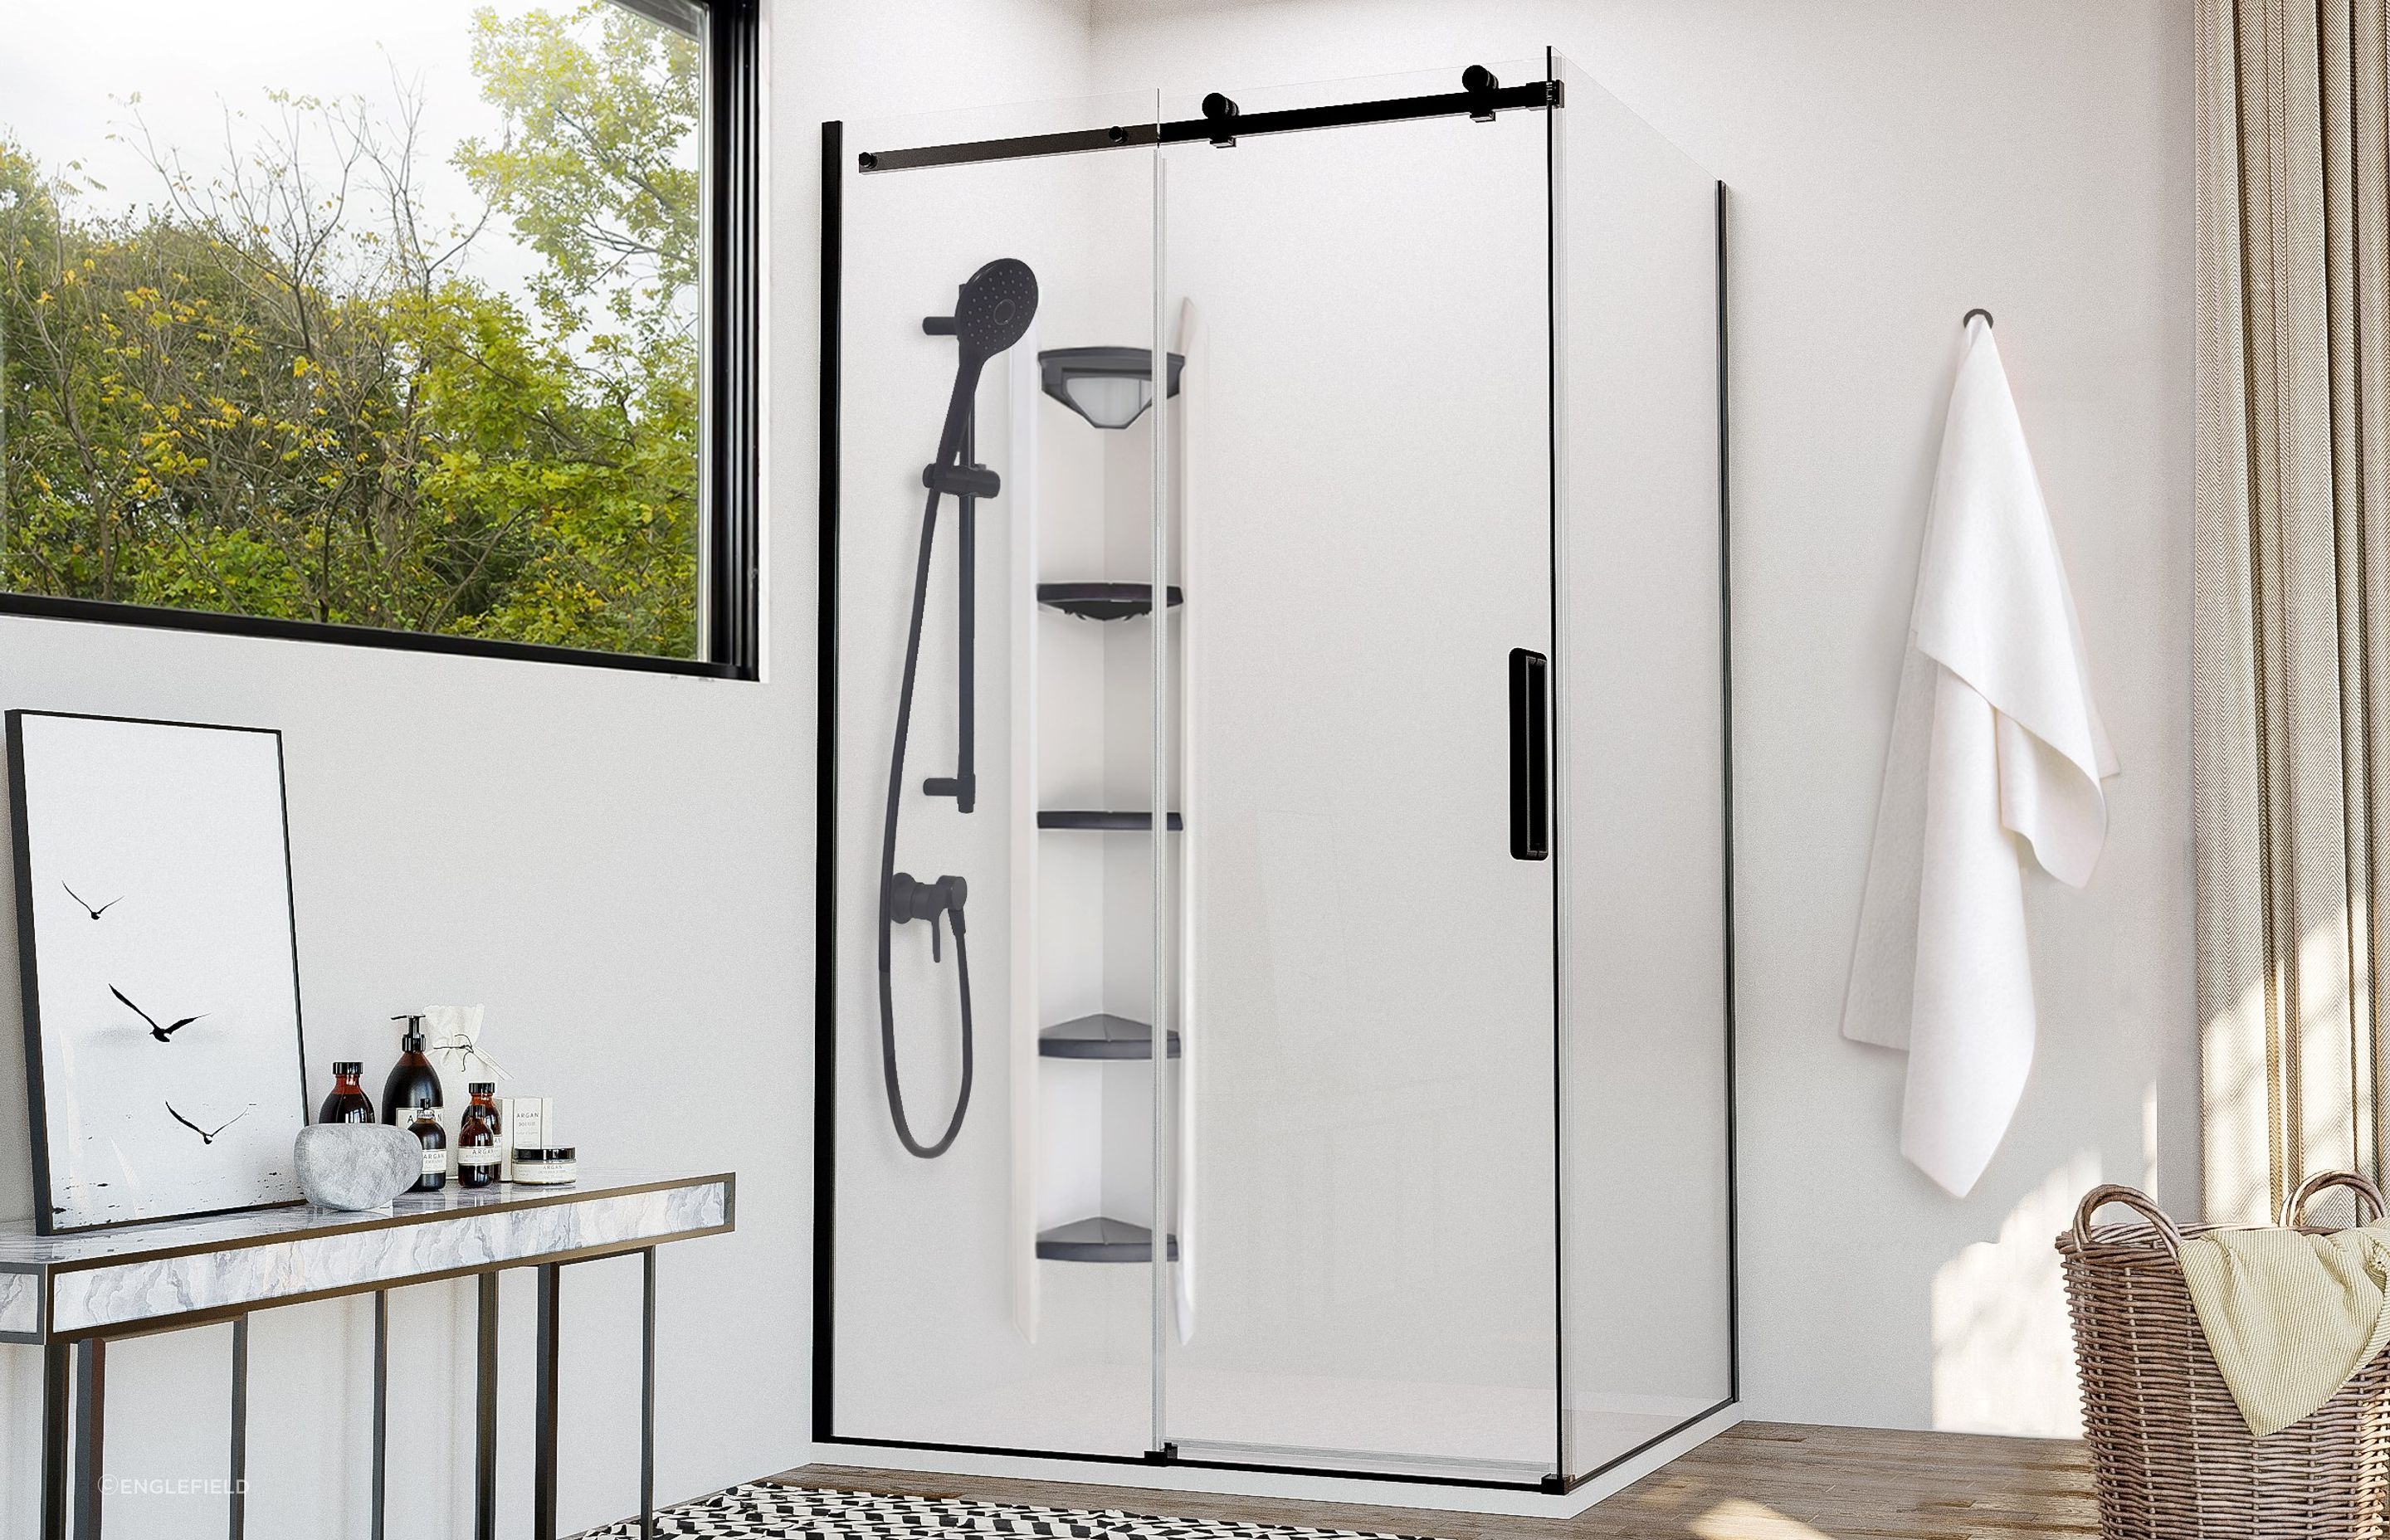 A high-quality shower enclosure like the Evora Frameless Shower offers a cosy and luxurious showering experience.